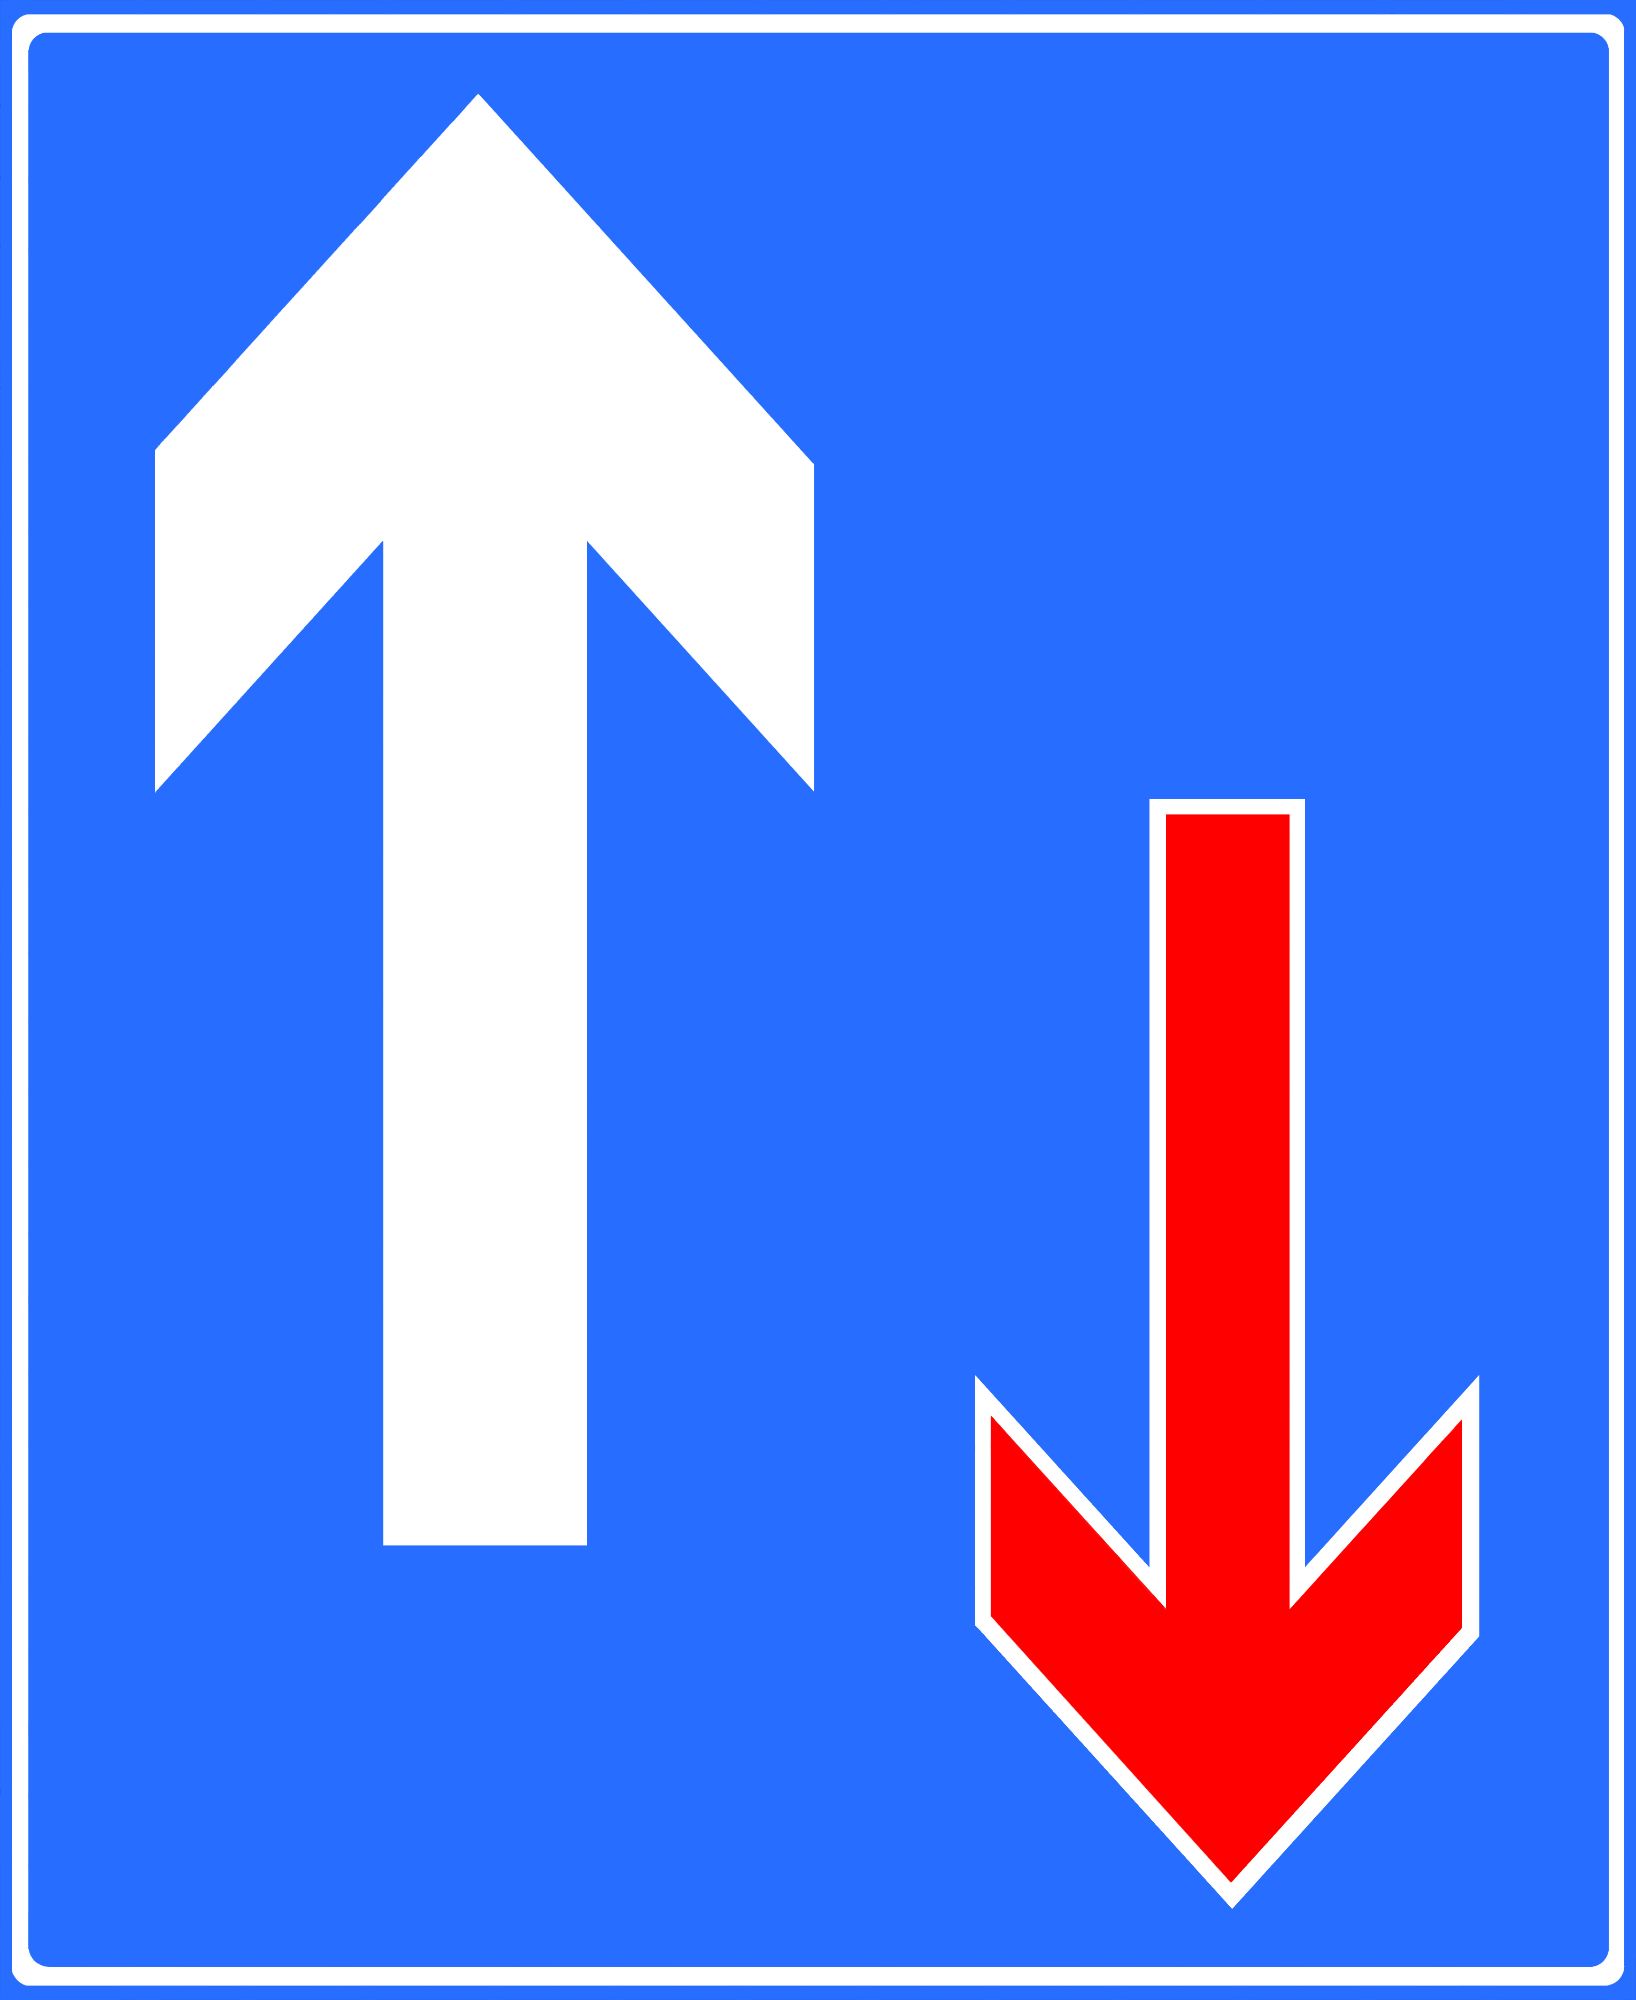 Going to the wrong side of a â€˜keep leftâ€™ sign - You go to the wrong side of a â€˜keep leftâ€™ sign in the road.  Ignoring a â€˜stopâ€™ or â€˜no entryâ€™ sign - You ignore either: a â€˜stopâ€™ sign by crossing the line on the road and not making sure the way ahead is clear  a â€˜no entryâ€™ sign (these are usually at the end of a one-way road, where all traffic would be heading towards you)  Driving in a bus lane - You drive in a bus lane when a sign shows that you cannot use it at that time.  Choosing the wrong lane at a roundabout with clear signage - When you approach a roundabout, you get into the wrong lane when a sign clearly shows which lane you should go in. You then go around the roundabout in the wrong lane.  Acting late or not at all to speed limit changes - You either act far too late or not at all when a clearly visible sign shows a change of speed limit.